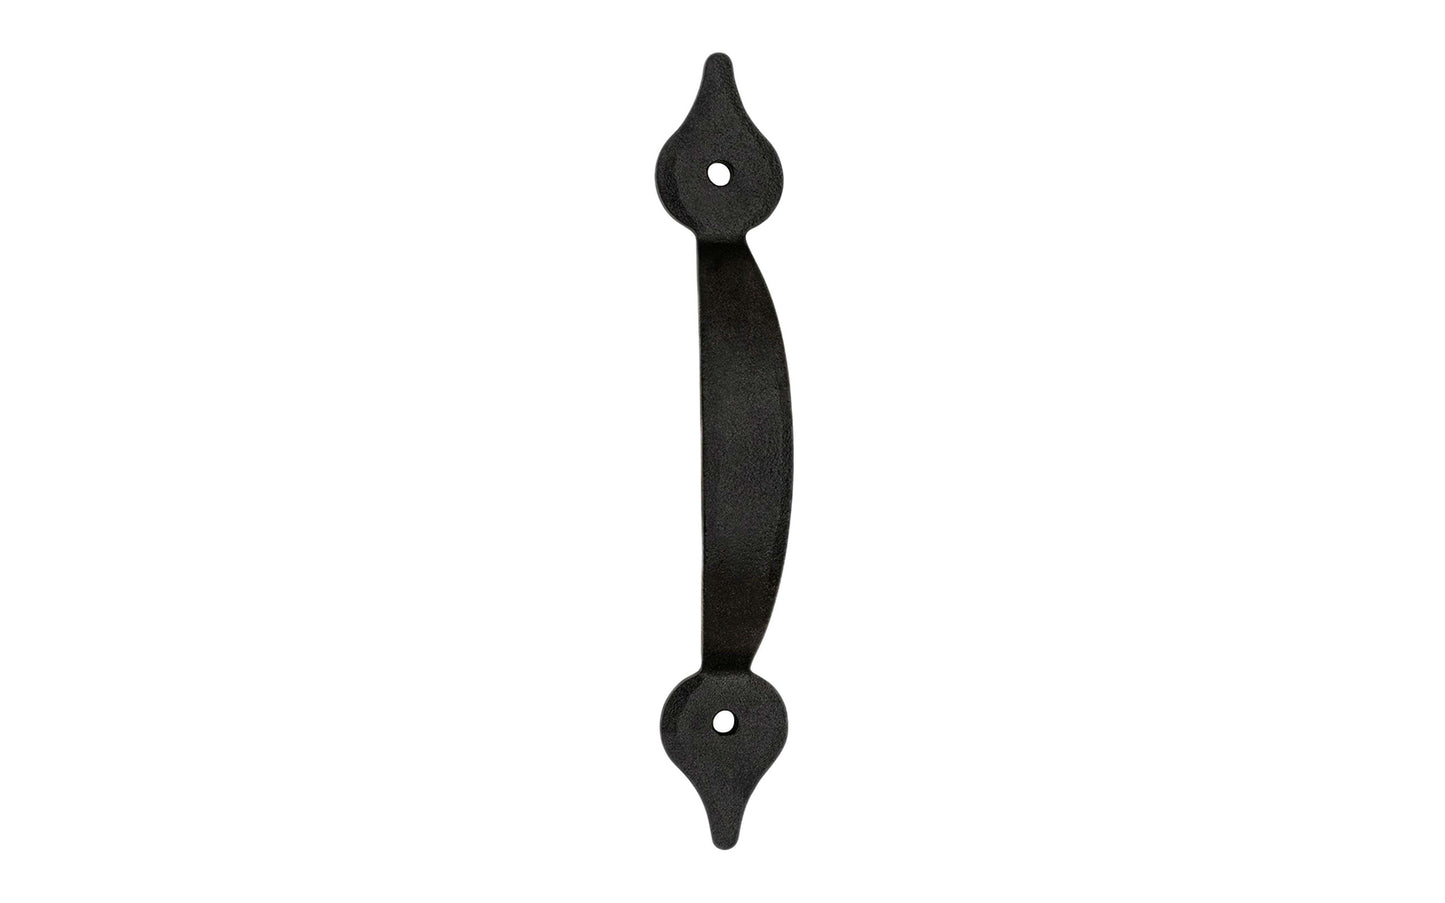 A hand-forged "Spade Style" cabinet pull handle. Made of steel material with a black finish, it has a nice durable & strong feel. Traditional & ornate piece of hardware is great for cabinets, furniture, drawers, & small doors. Powder coated to resist rust. Model 88616 ~ 3-1/2" on centers - Spade tips - Rustic finish